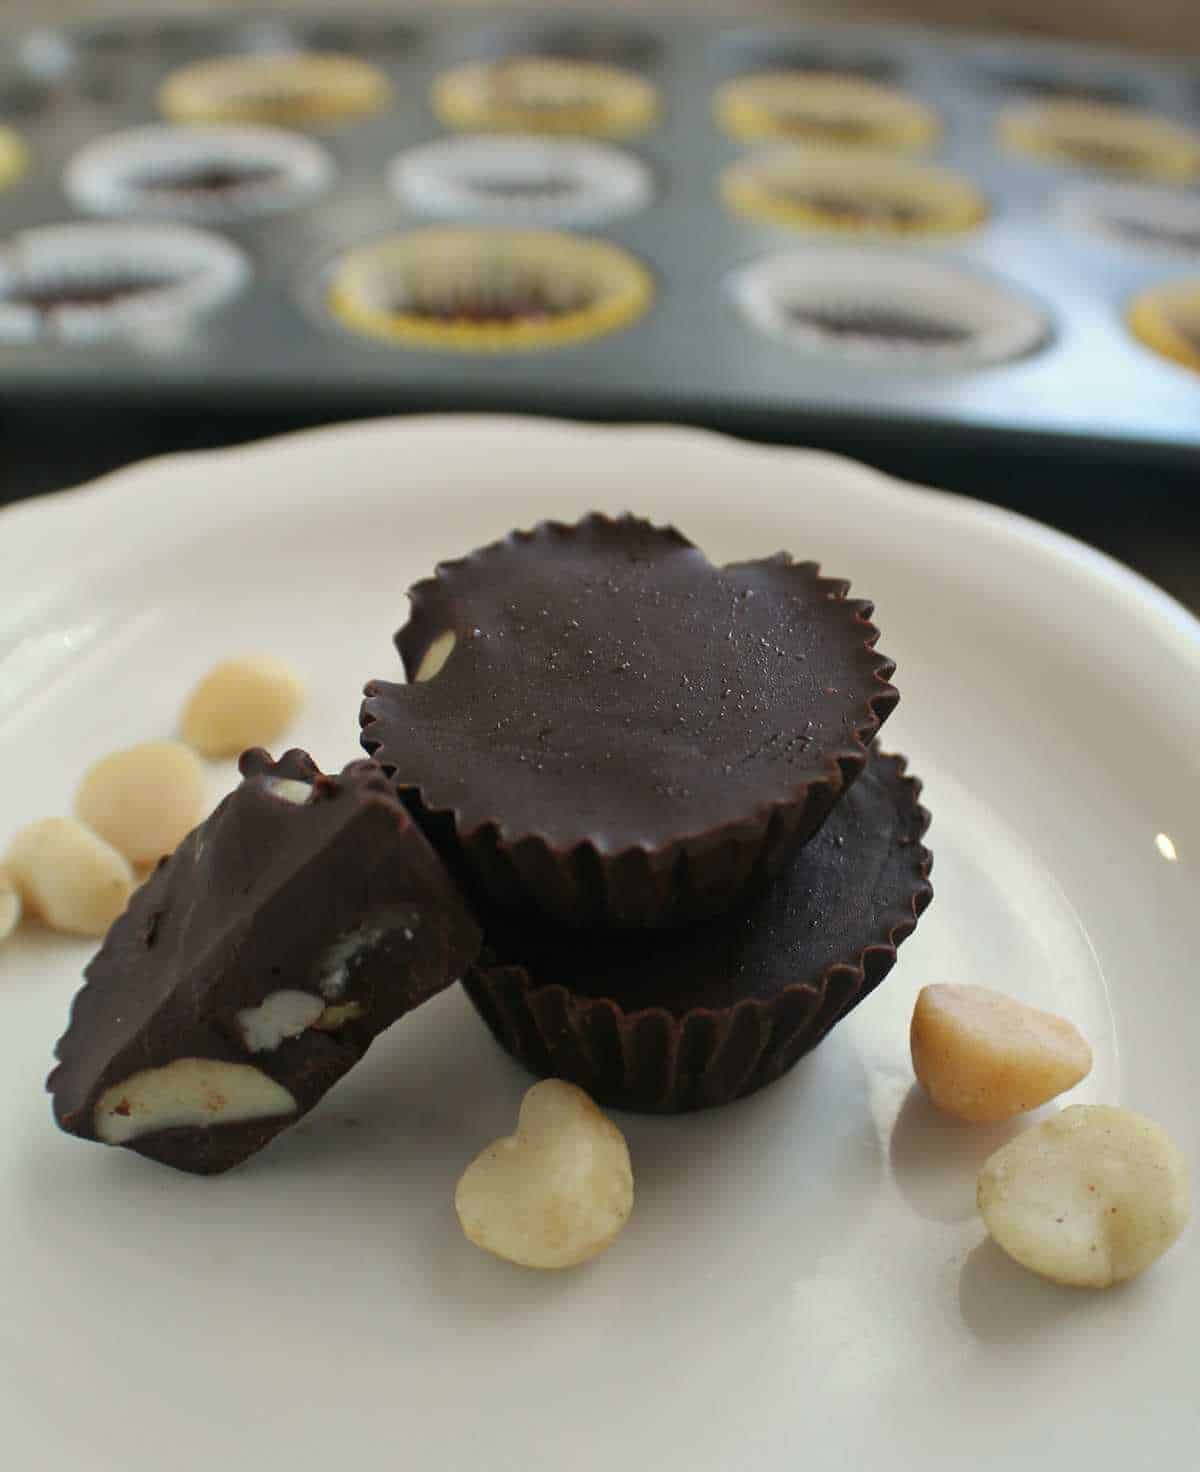 Keto chocolate peanut butter cups displayed on a white plate.